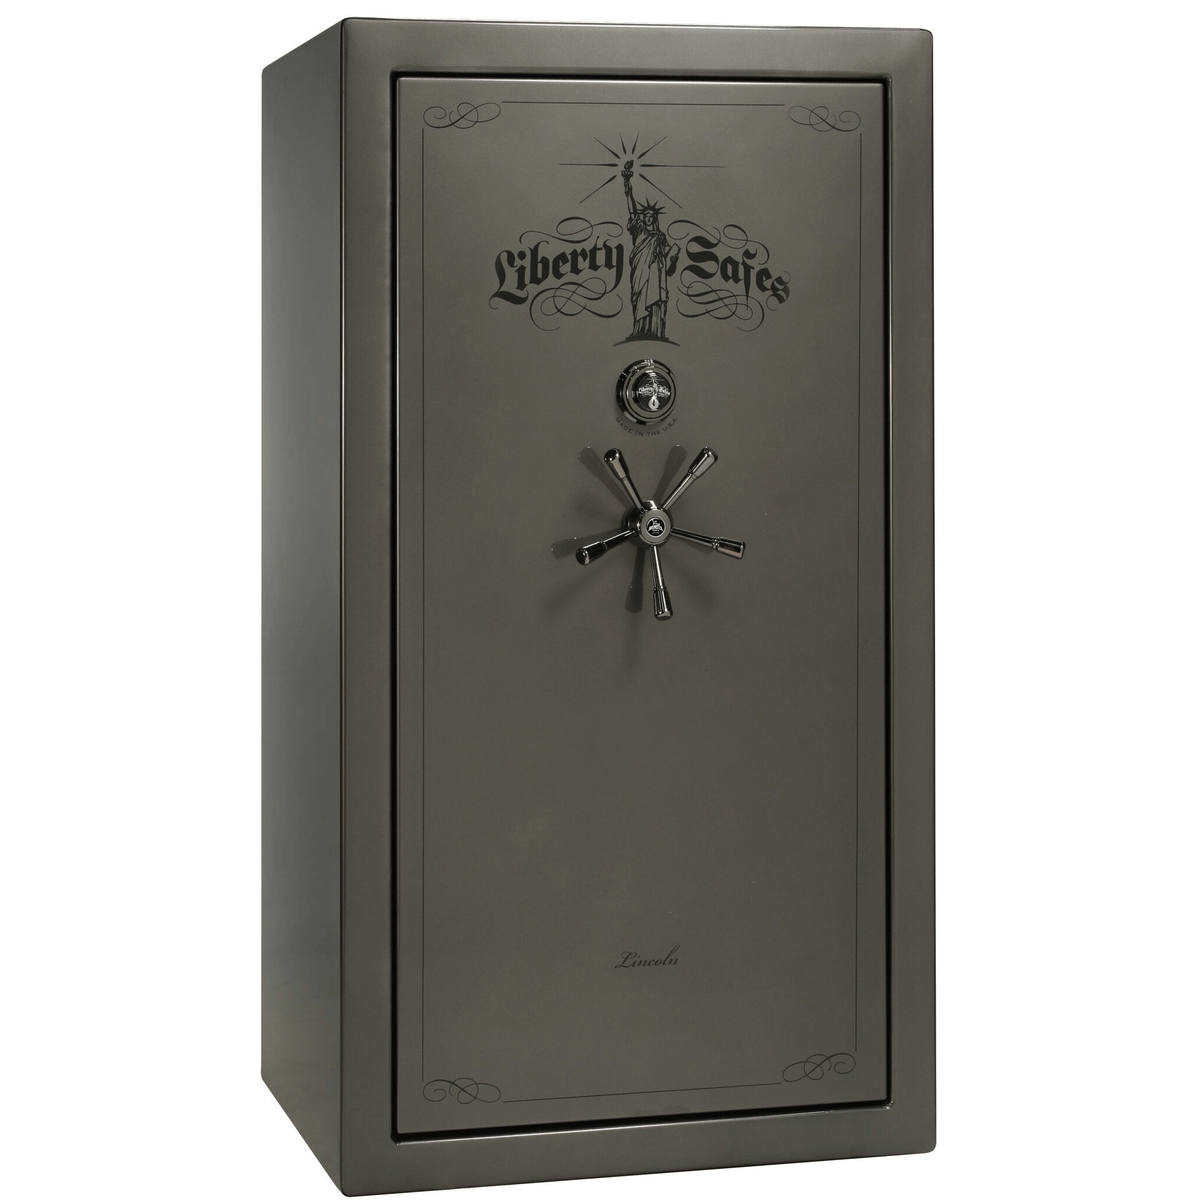 Liberty Lincoln 40 Safe in Gray Gloss with Black Chrome Mechanical Lock.